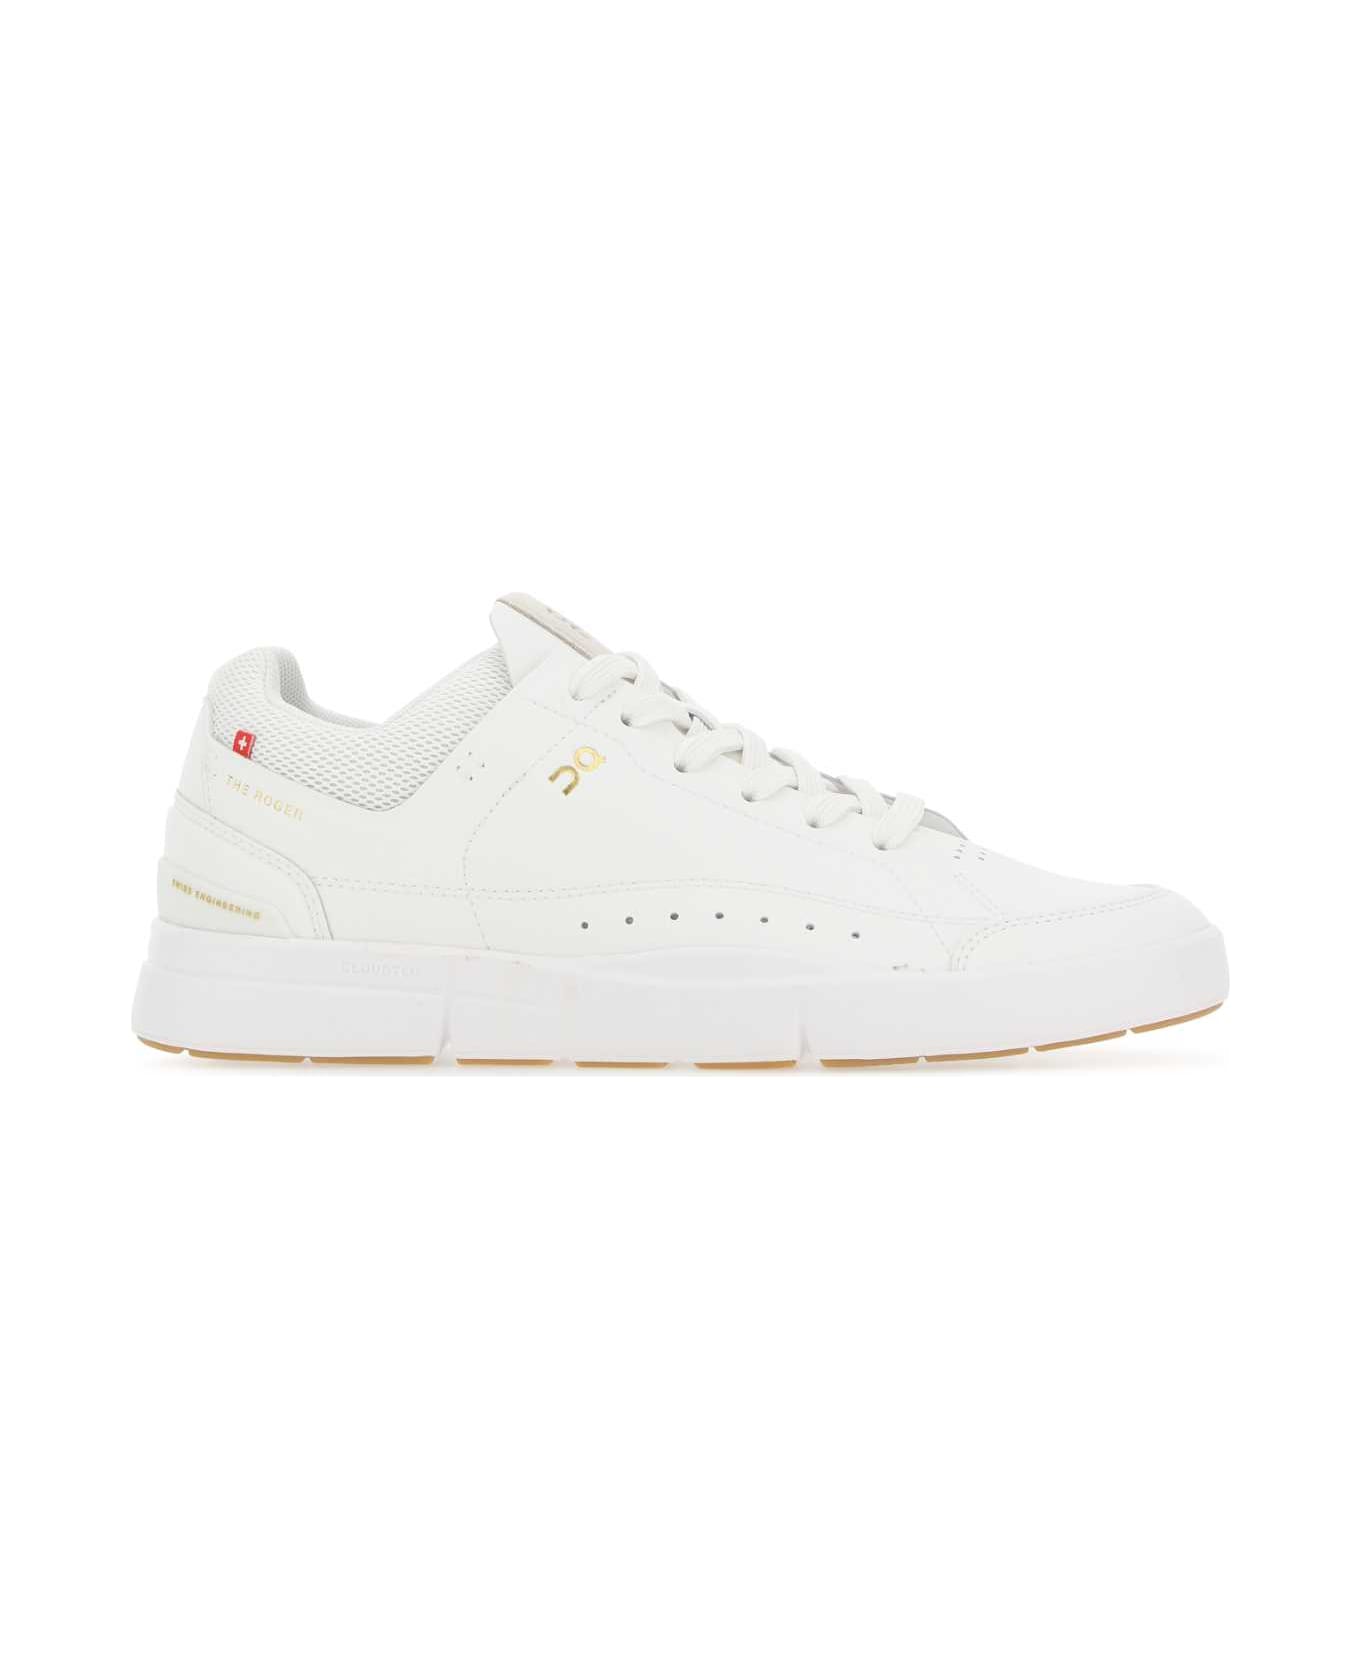 ON White Synthetic Leather And Fabric The Roger Center Court Sneakers - WHITEGUM スニーカー